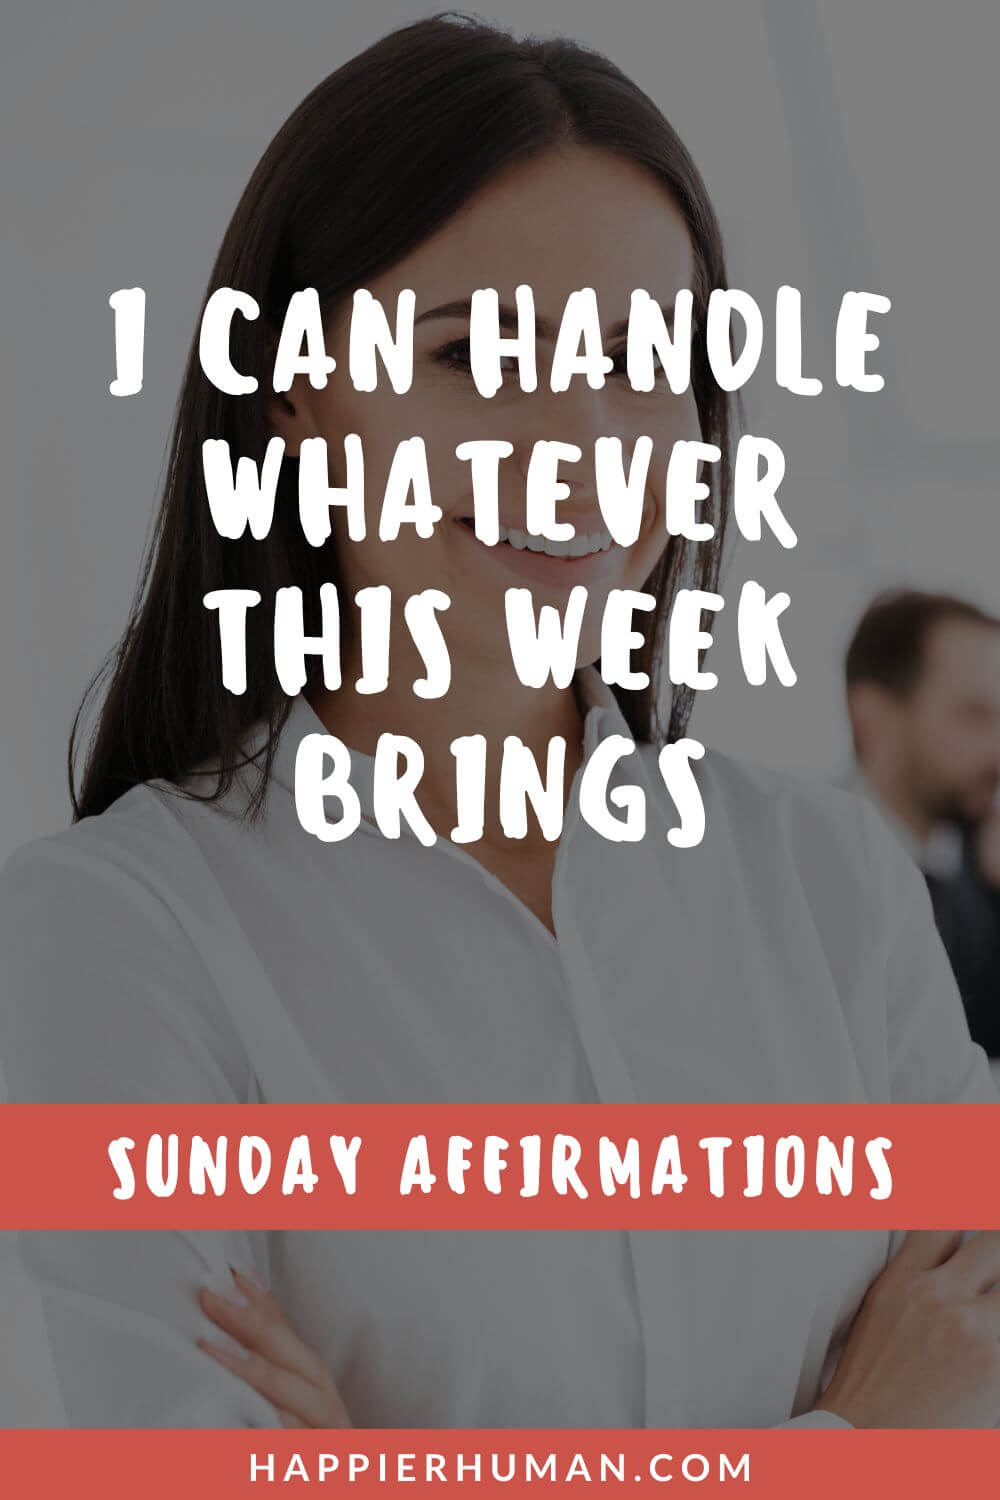 Sunday Affirmations - I can handle whatever this week brings | positive affirmations for others | monday affirmations | friday affirmations